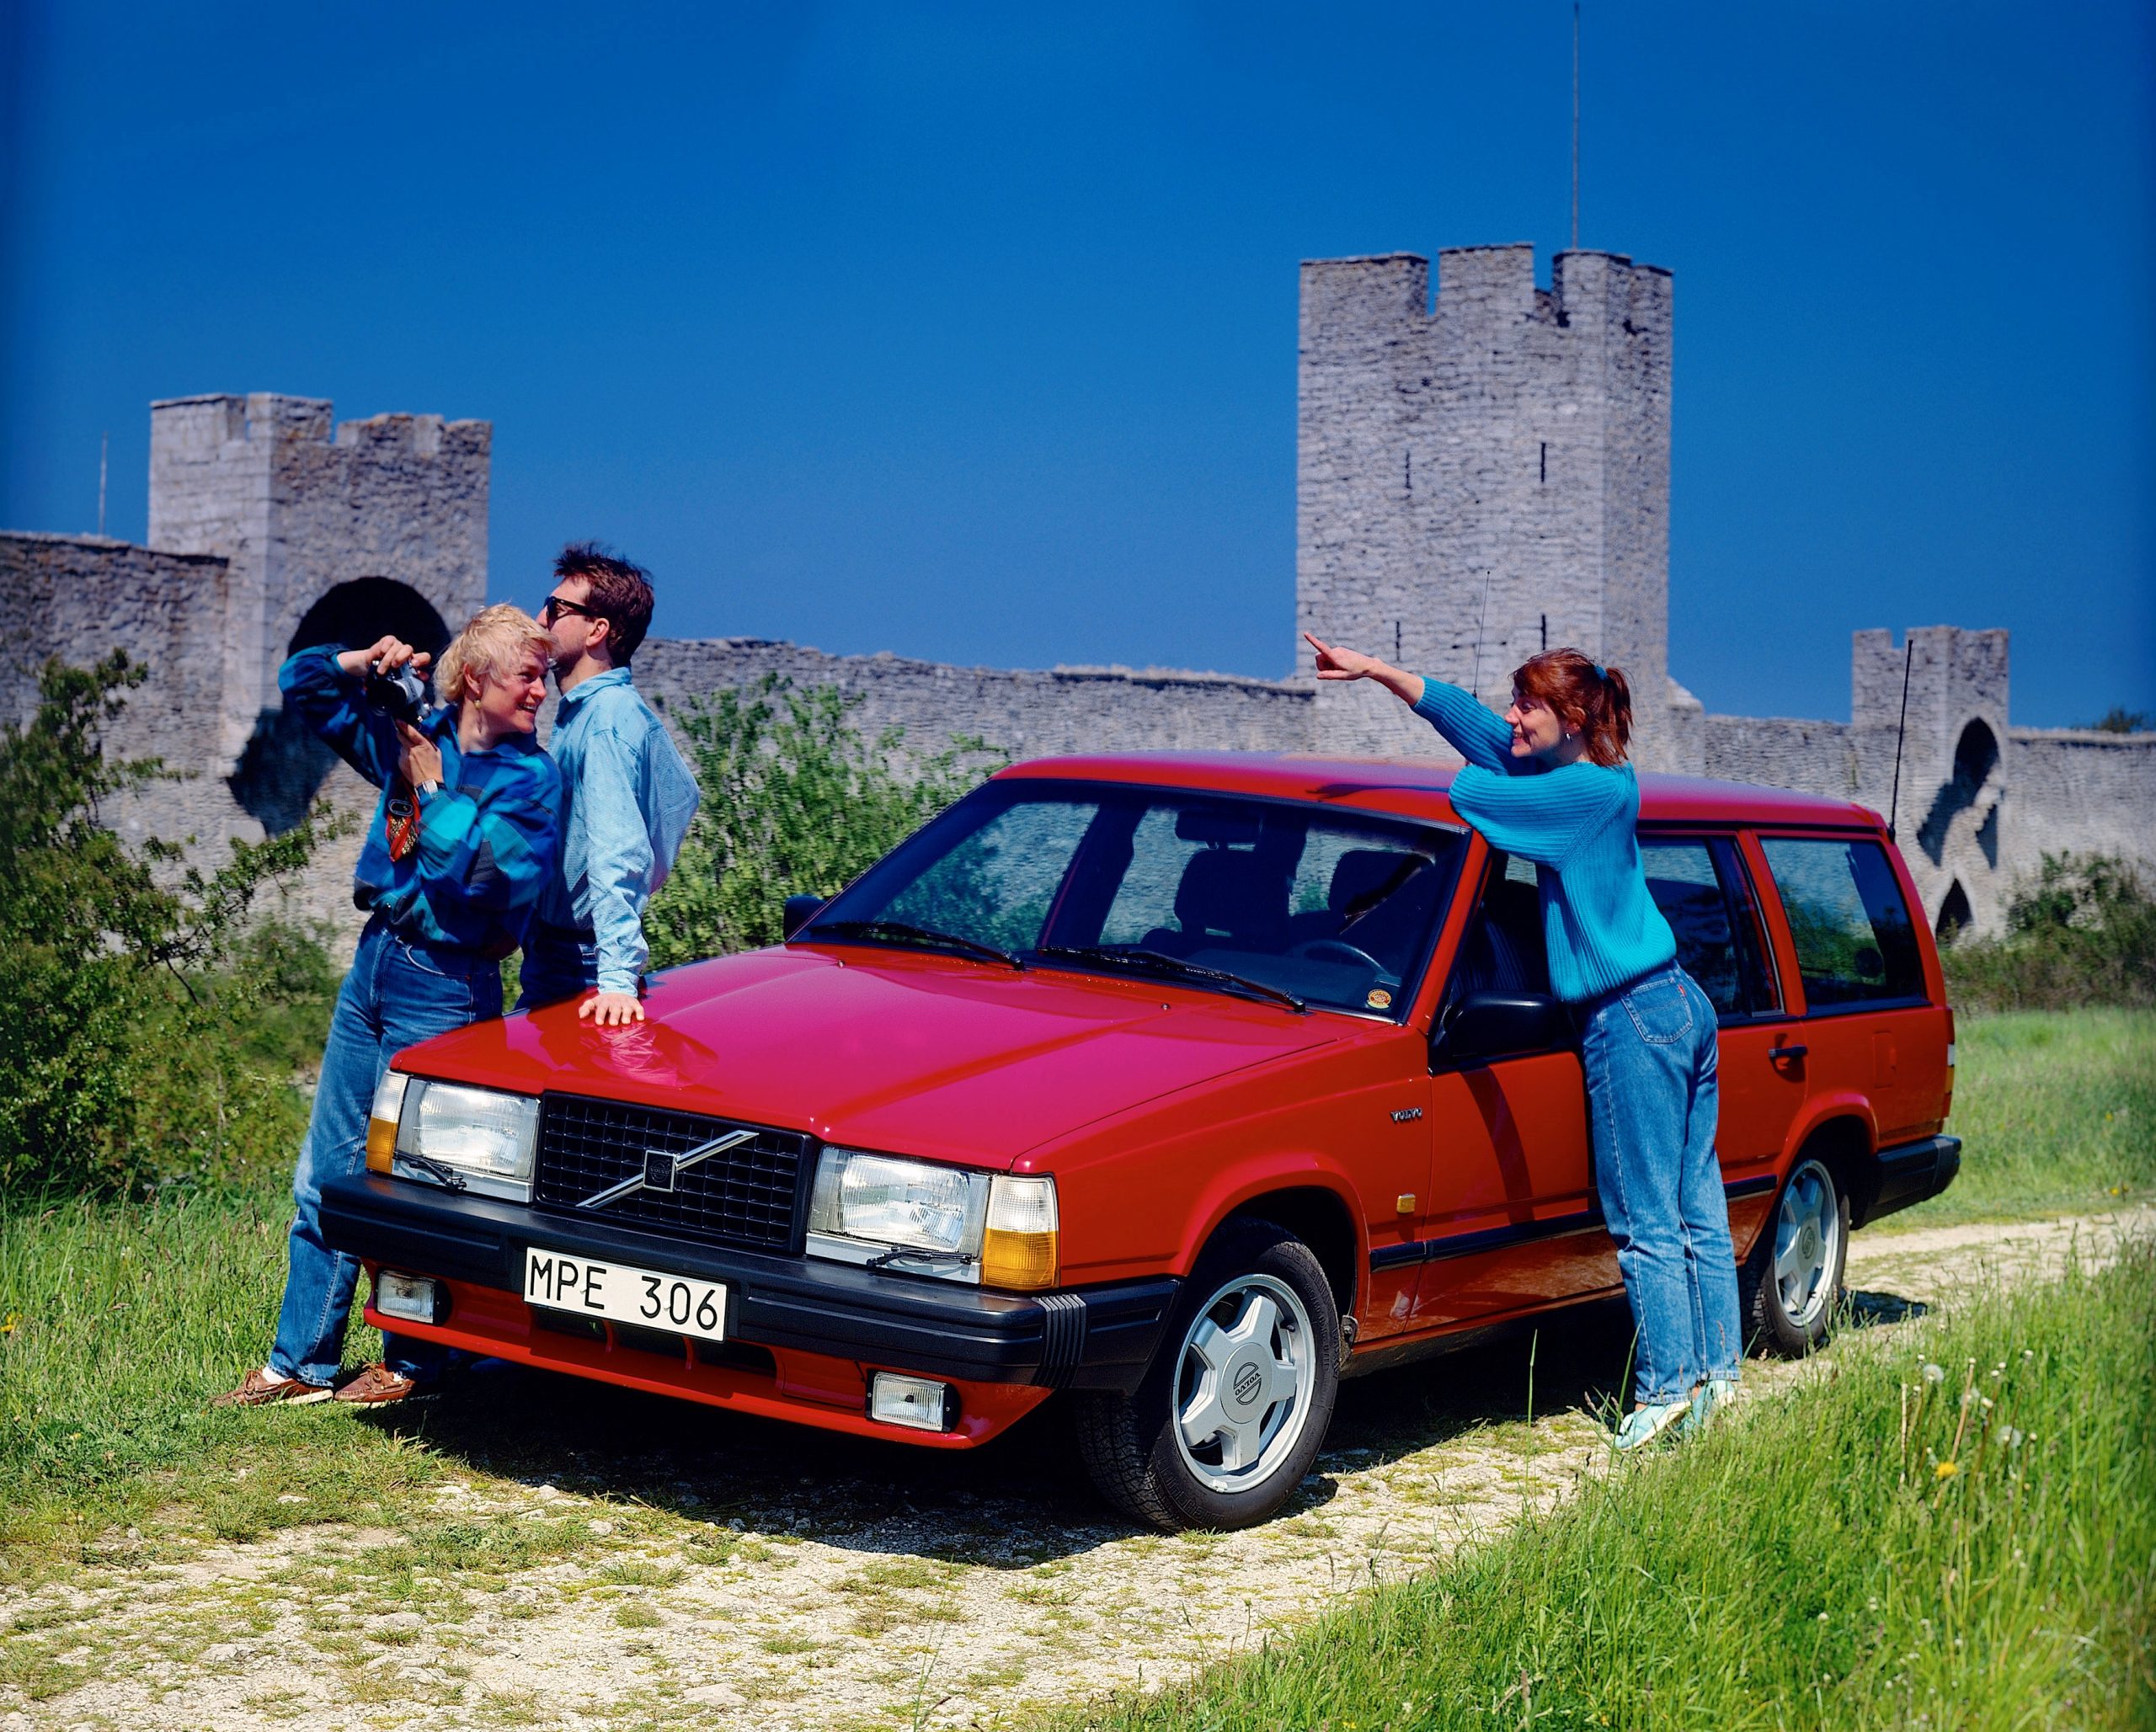 Don’t laugh – Volvo estates were cooler than you think